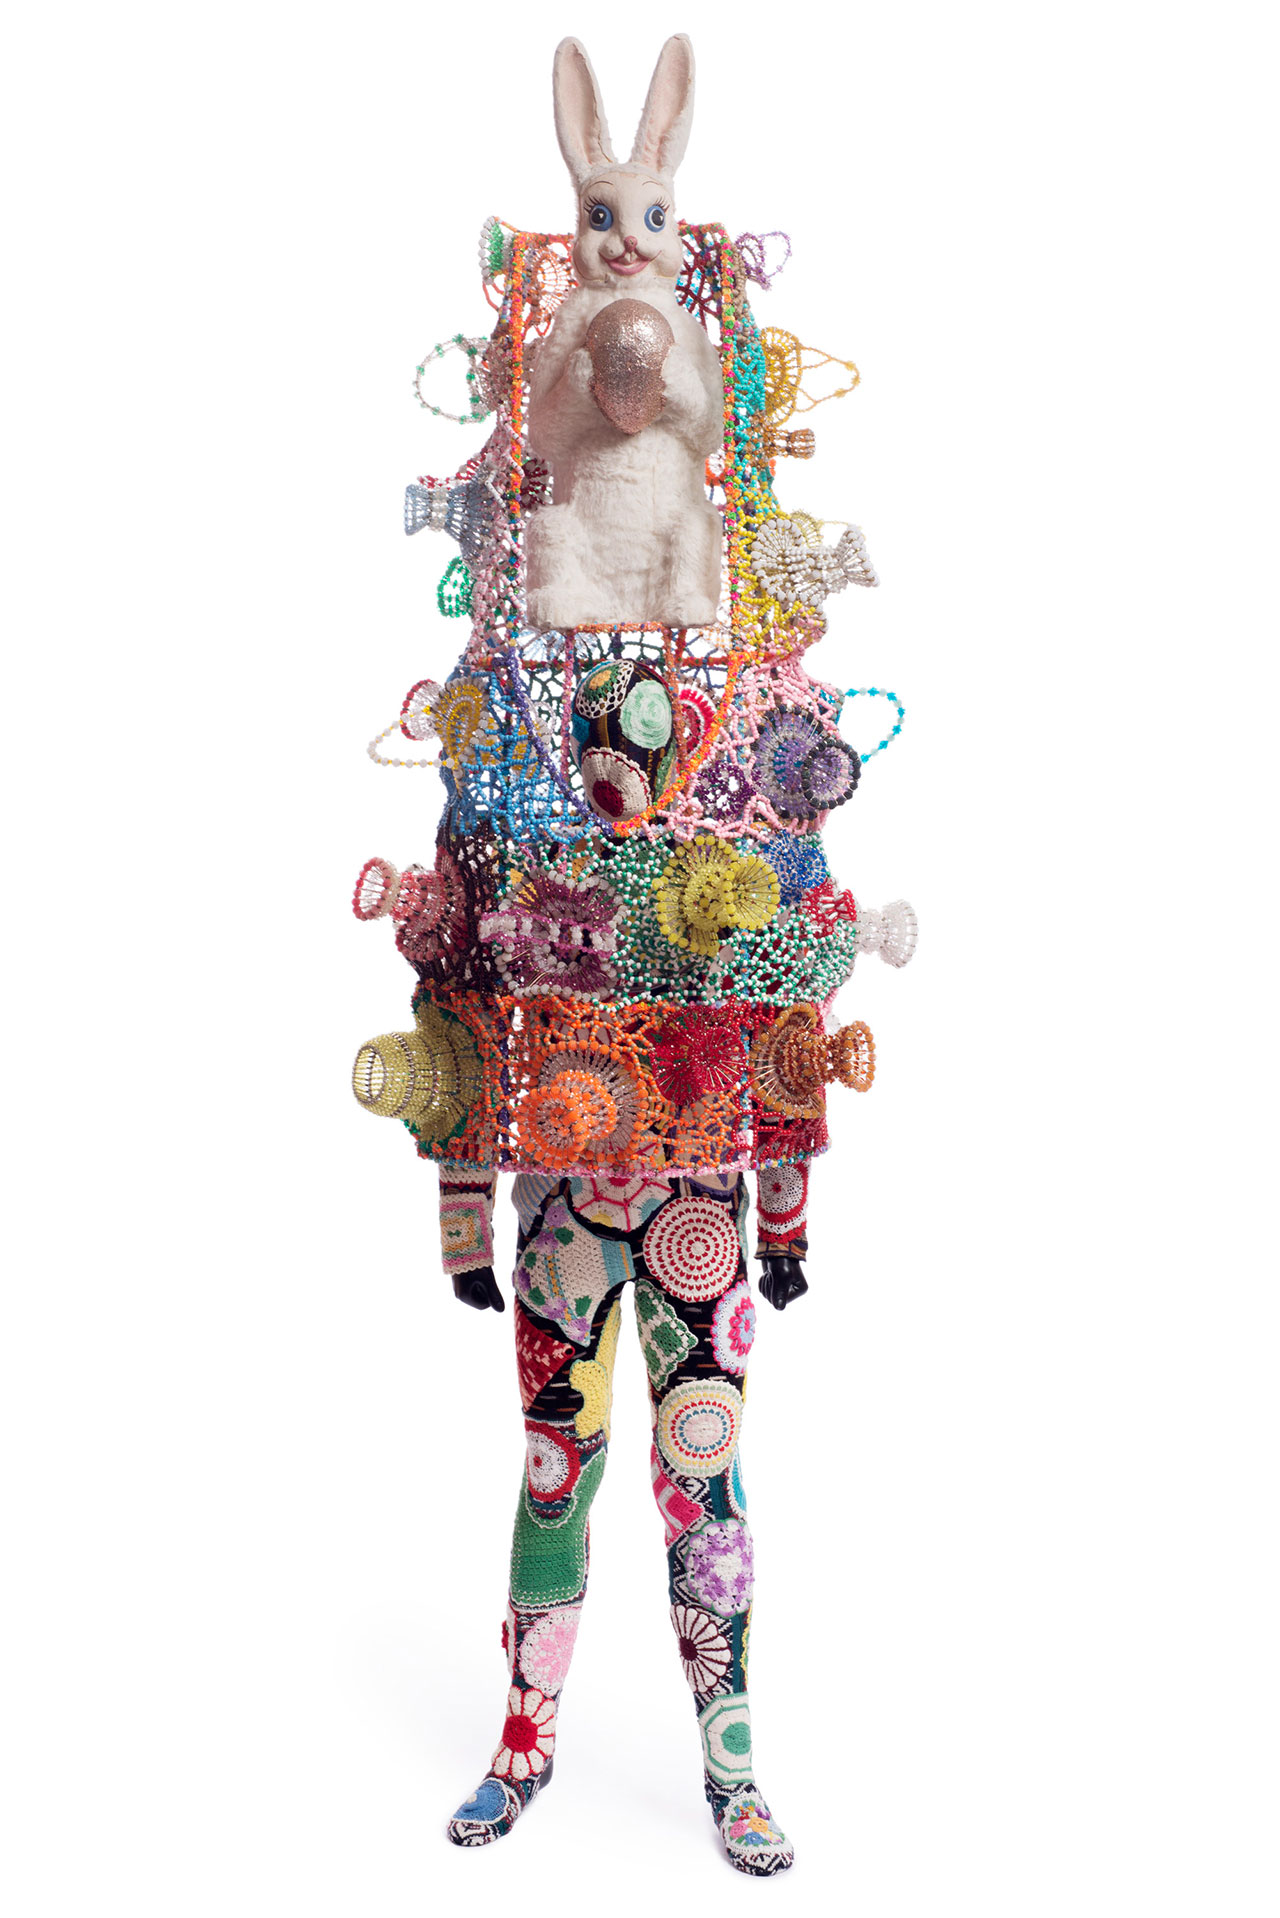 Nick Cave, Soundsuit, 2011. Mixed media including vintage bunny, safety pin craft baskets, hot pads, fabric, metal, and mannequin. 111 x 36 x 36 in. © Nick Cave. Courtesy of the artist and Jack Shainman Gallery, New York.